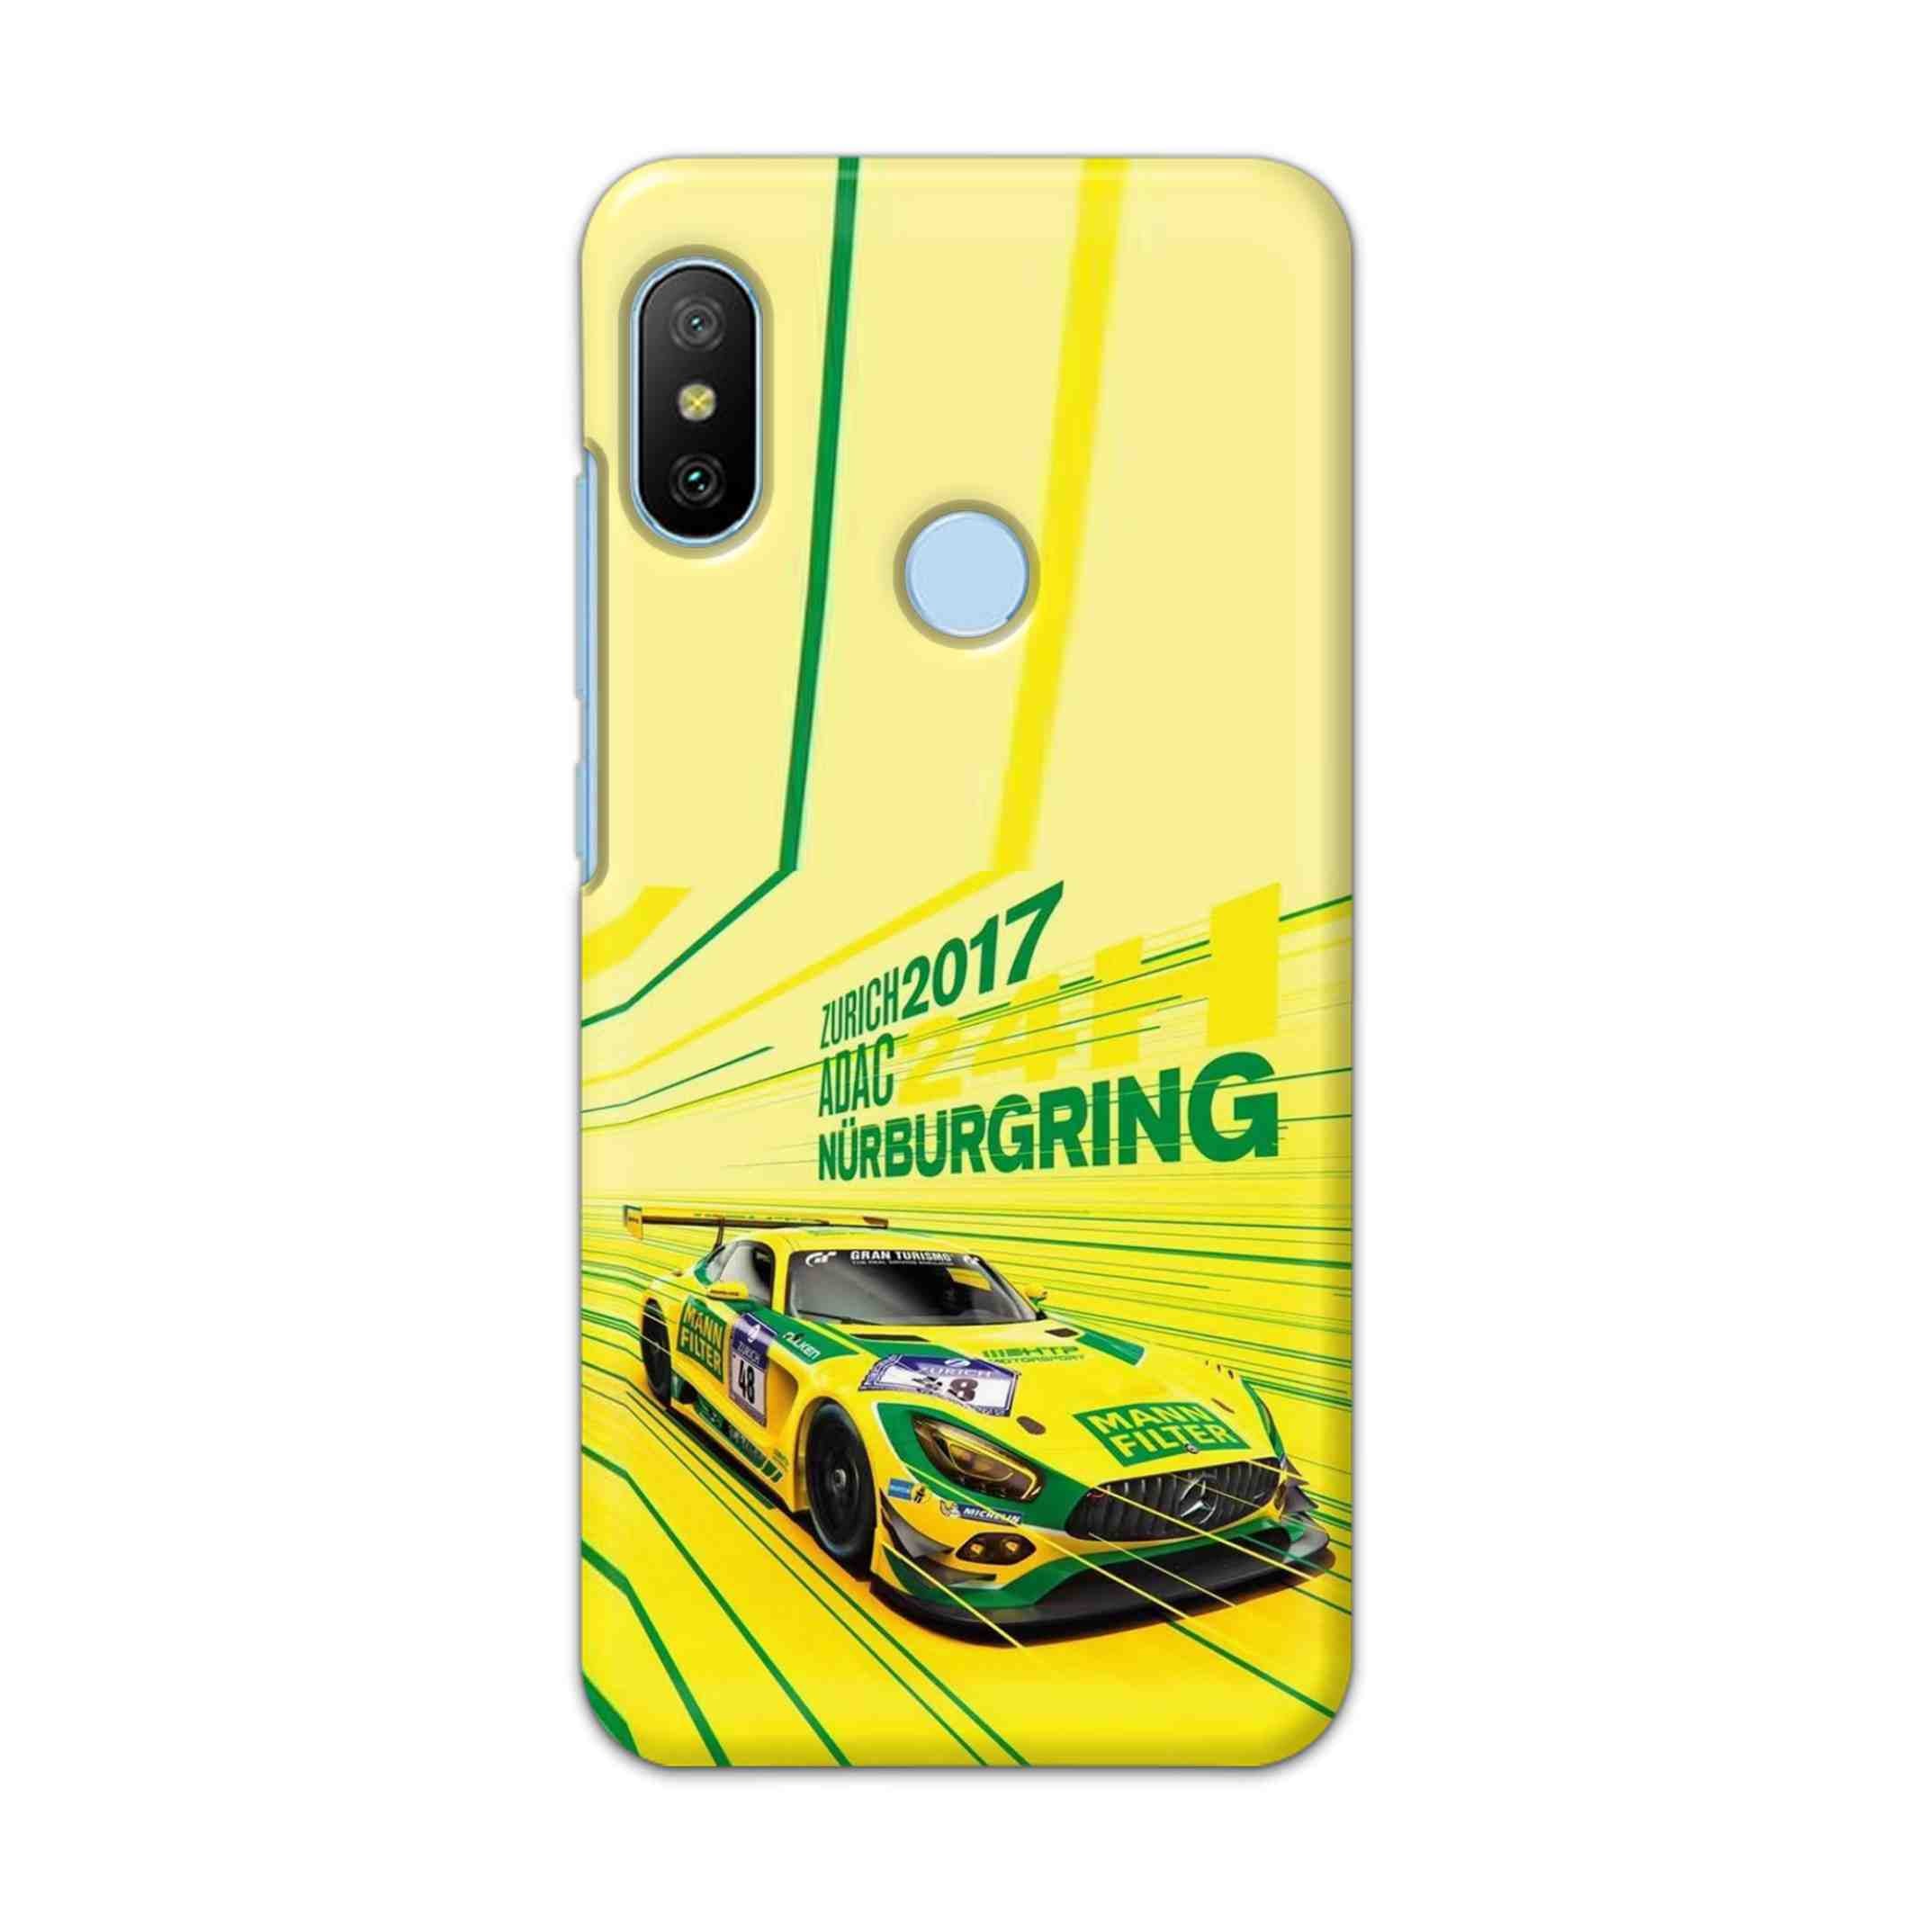 Buy Drift Racing Hard Back Mobile Phone Case/Cover For Xiaomi Redmi 6 Pro Online